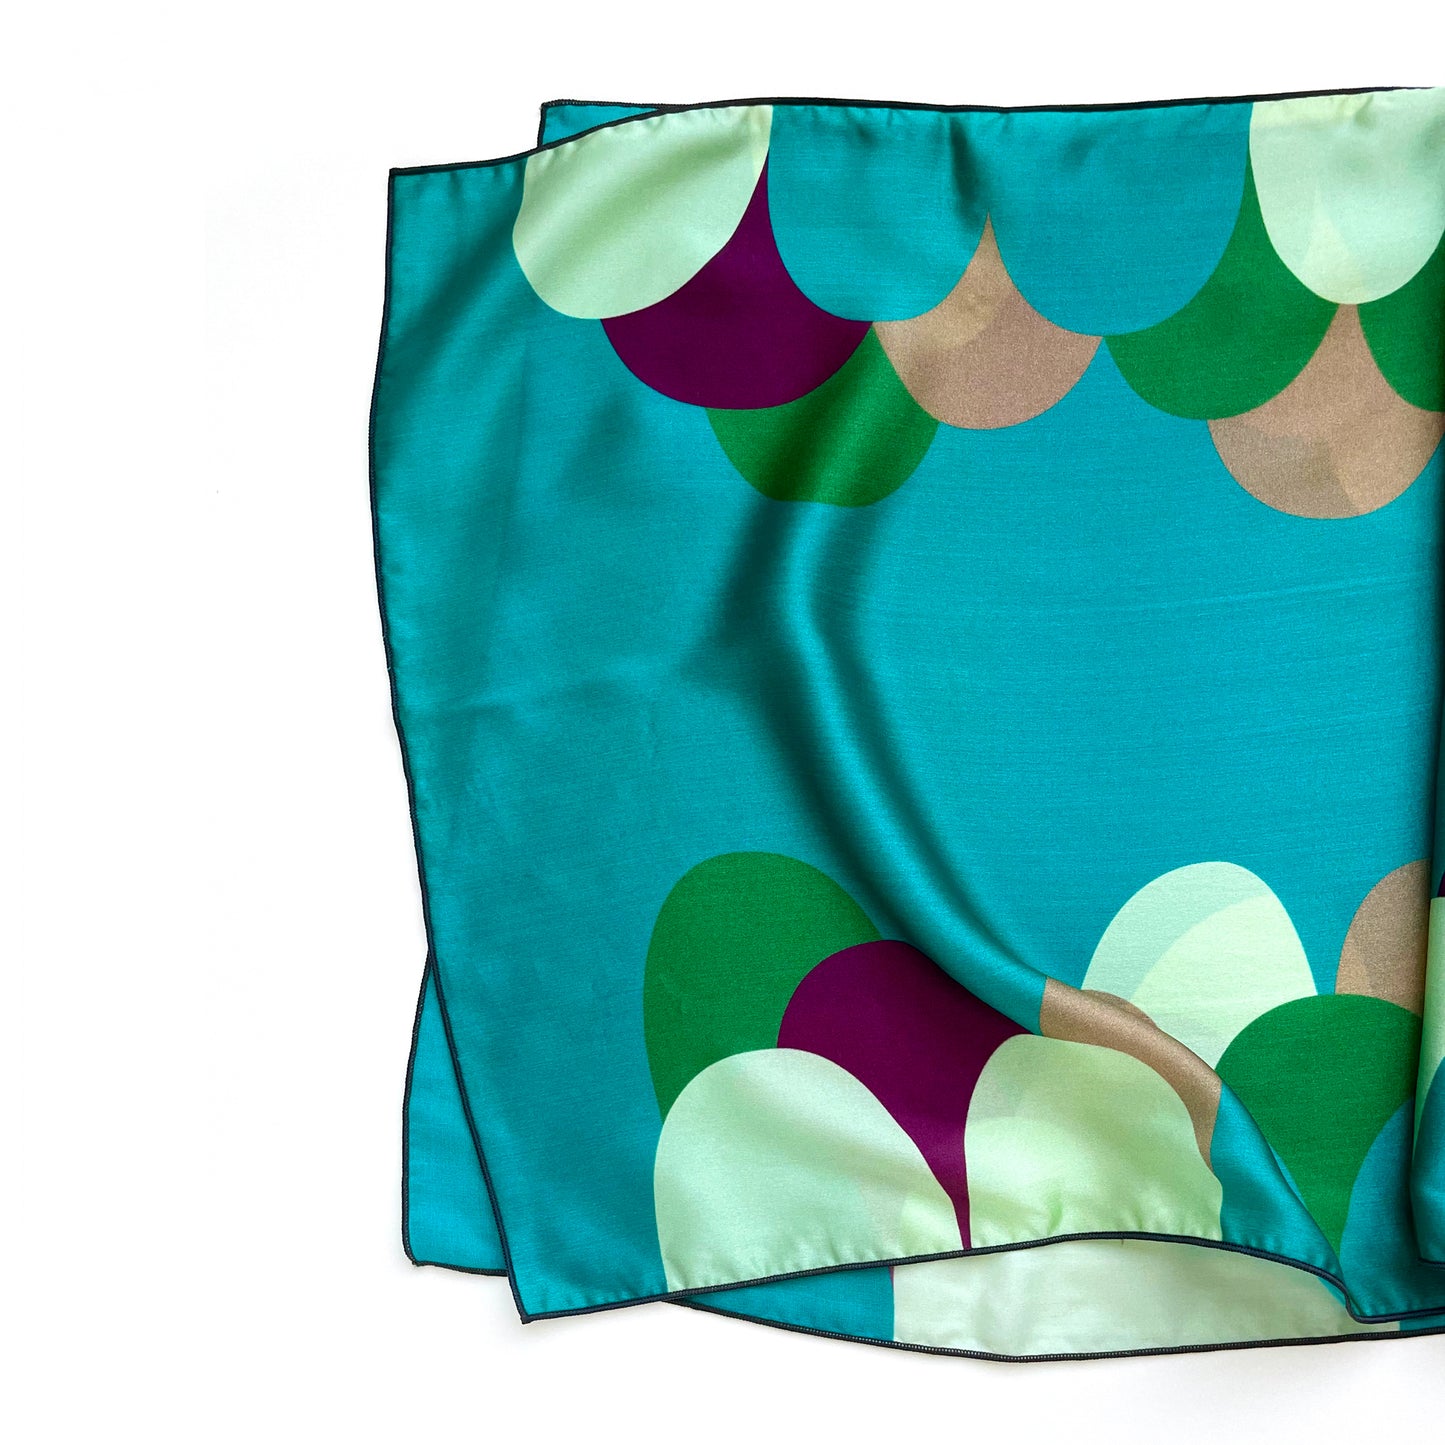 Inspired by sweets, this long silk charmeuse scarf in bold teals and creams looks good enough to eat. Add a touch of luxury to your outfit by using this as a bandana or headscarf